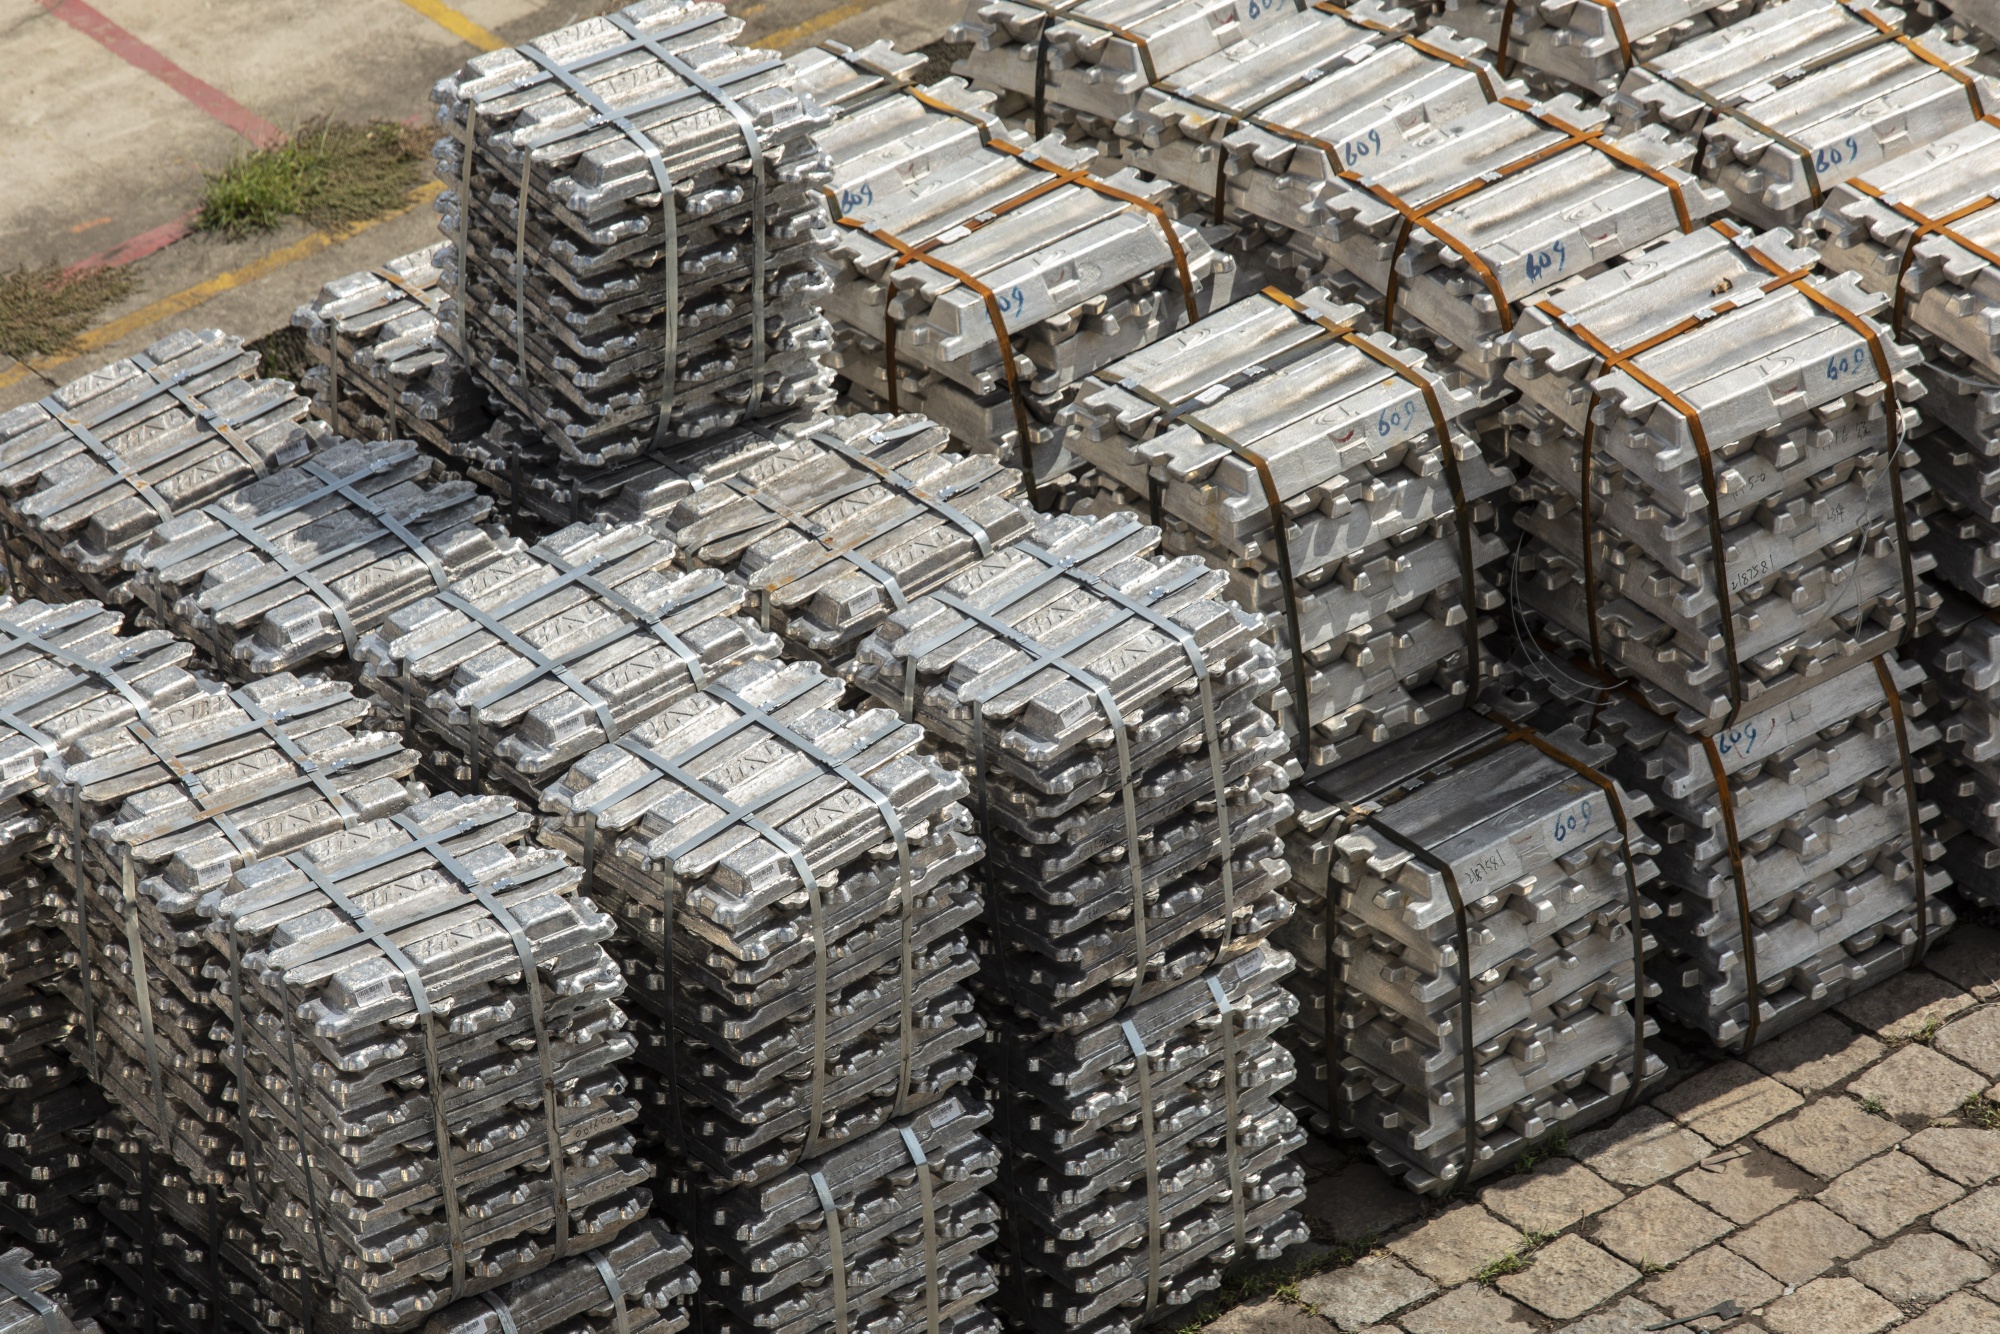 Europe Is Desperate for Aluminum and Traders Are Getting Creative